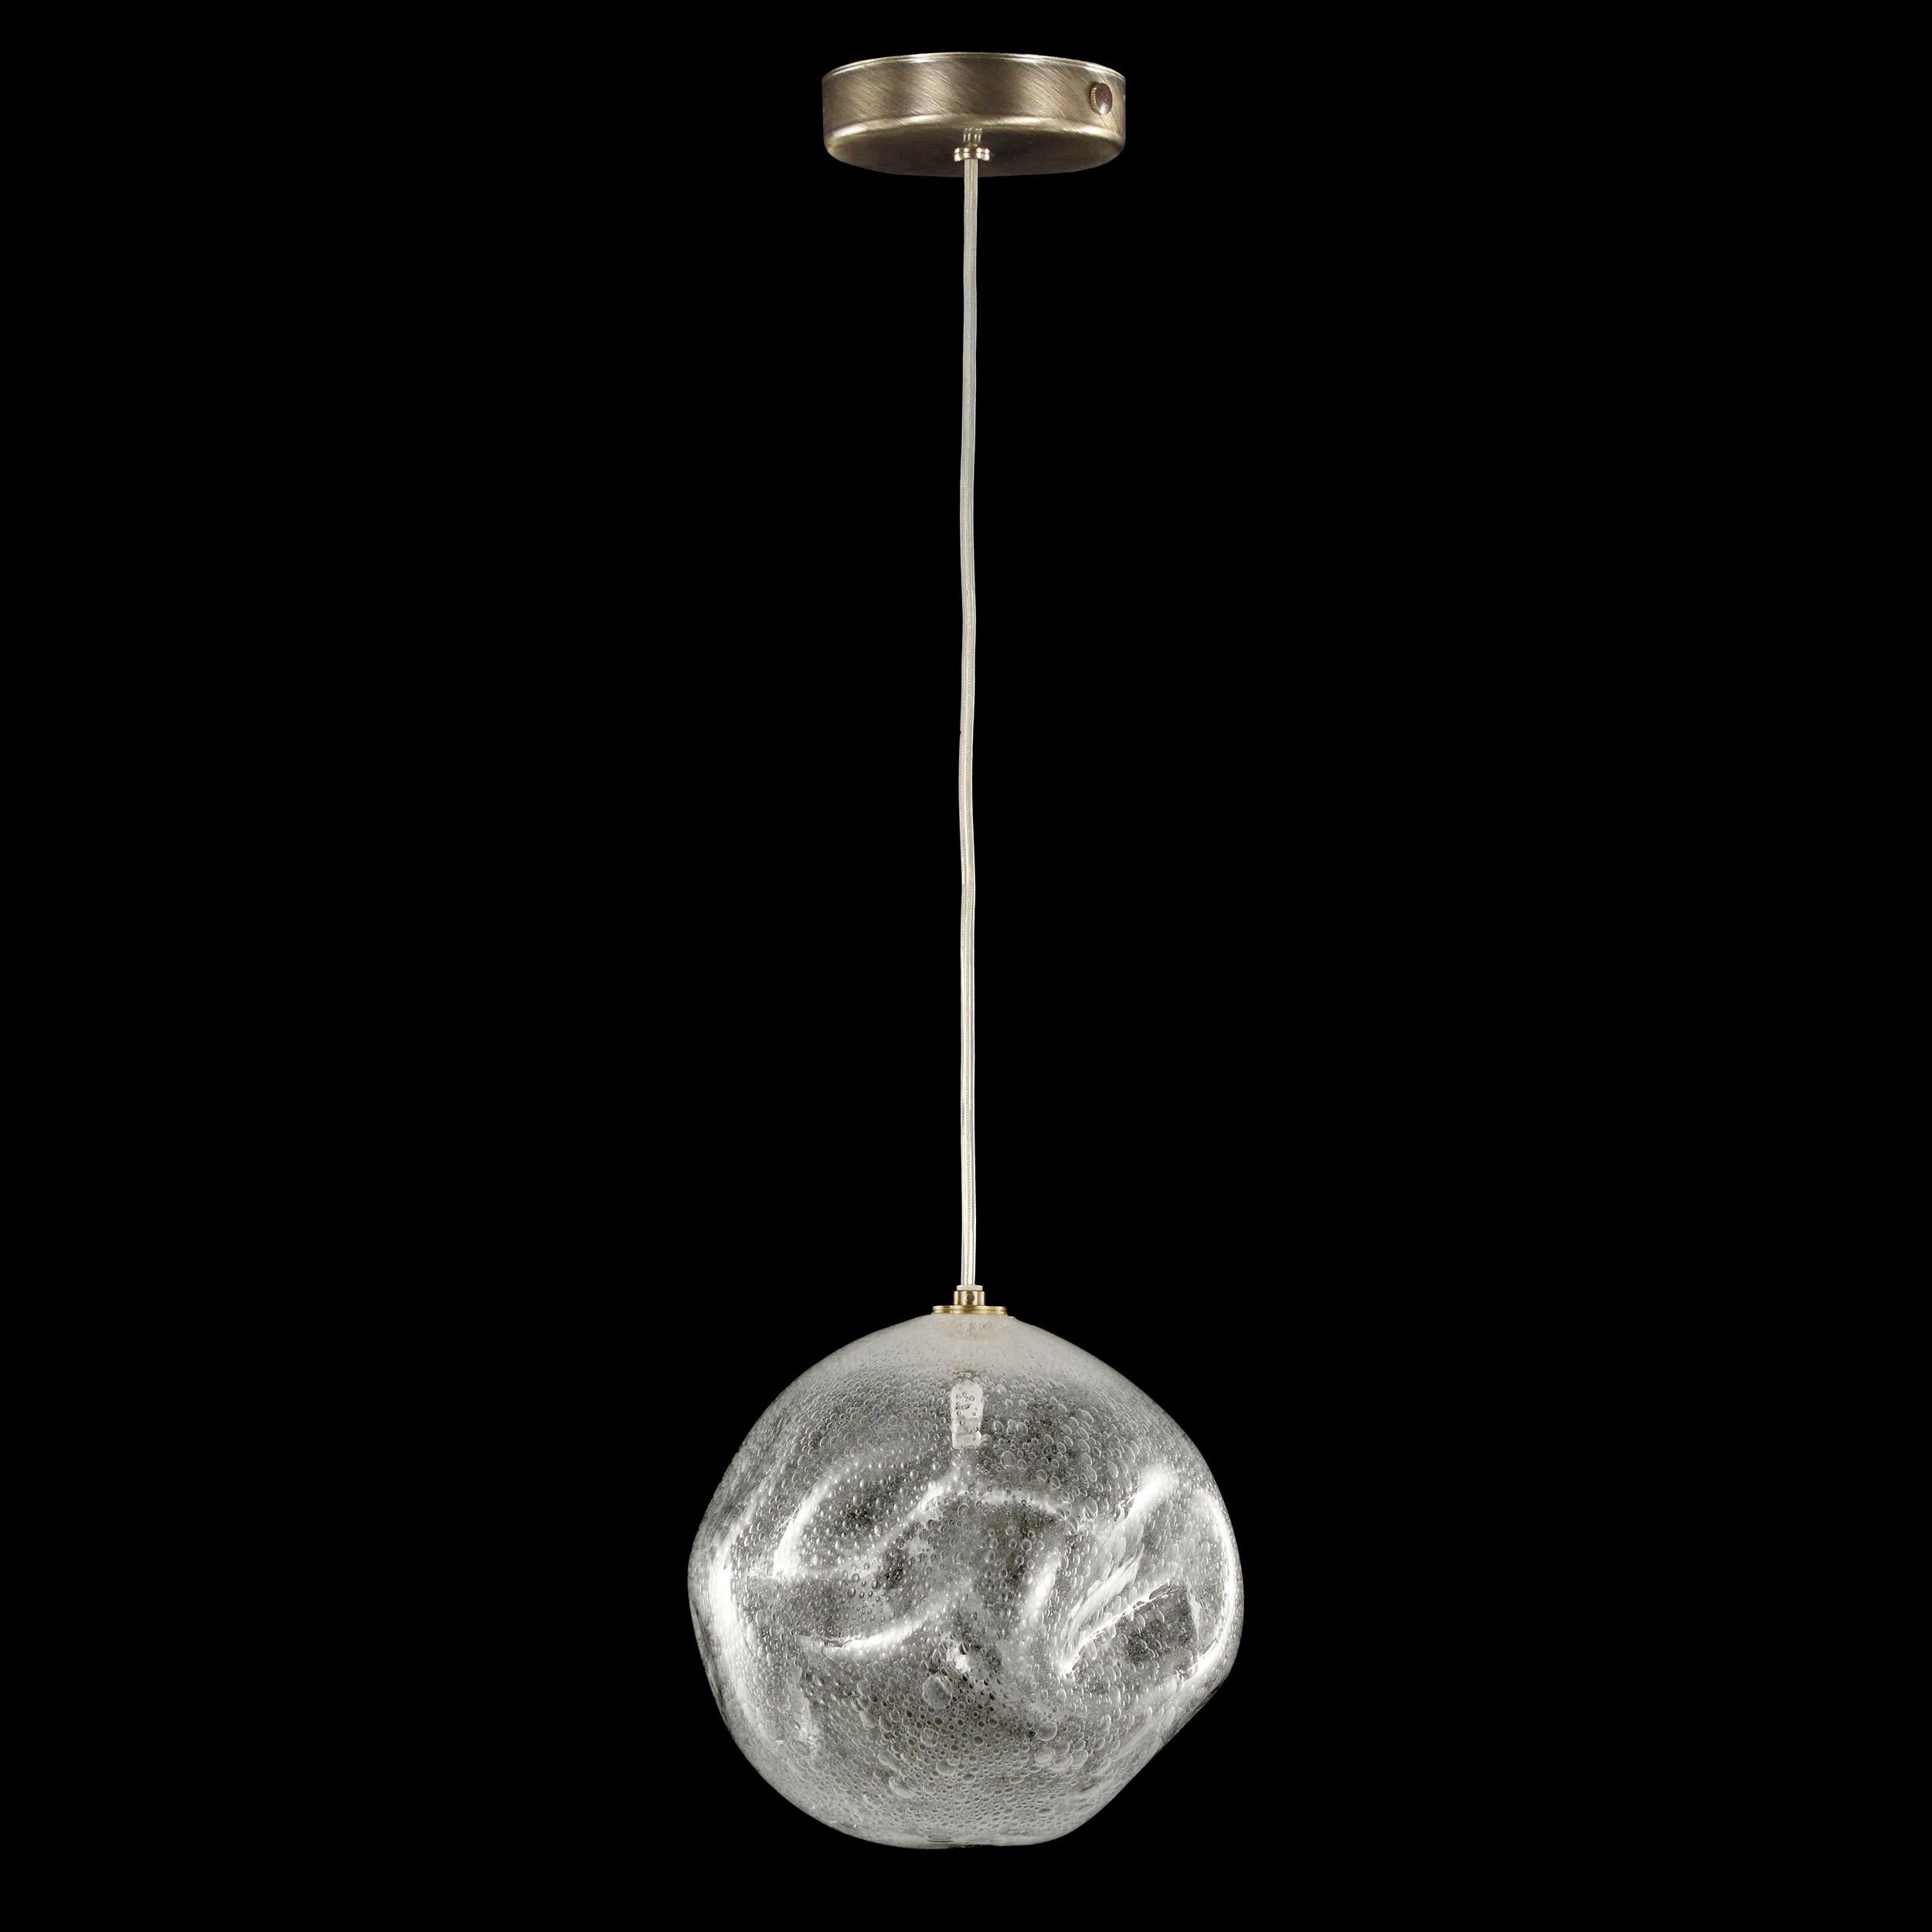 Artistic suspension lamp, glass sphere in clear Murano glass.
Elegant and unmistakable, suggestive and poetical, soft and delicate are some of the adjectives that can be used to describe the blown glass ball chandelier Desafinado, our ceiling light